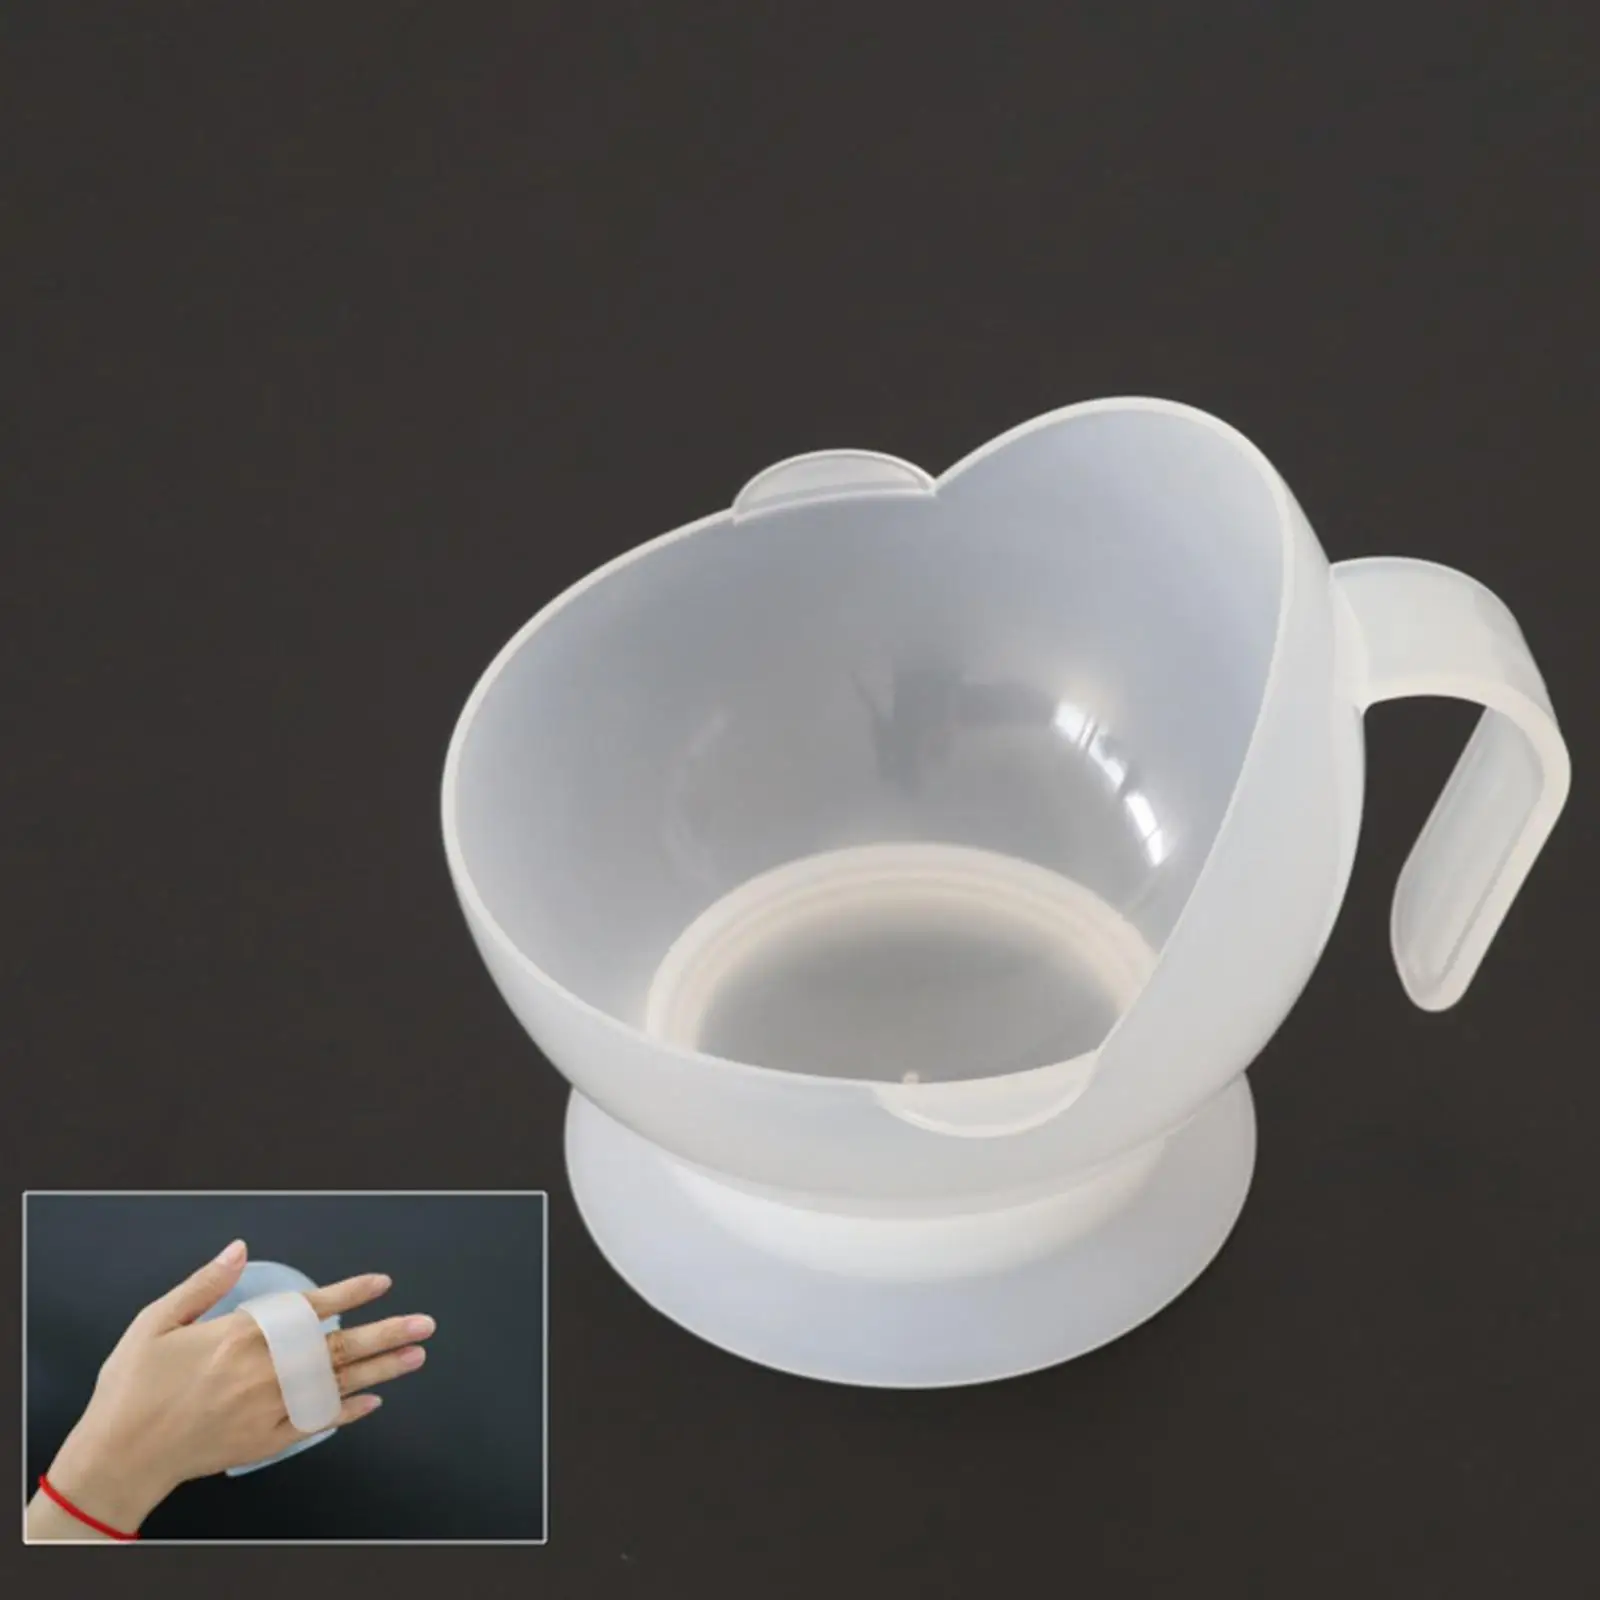 Spill Proof Scoop Bowl Food Auxiliary Tableware with Suction Base Scoop Plates for Disabled with Special Needs Adults